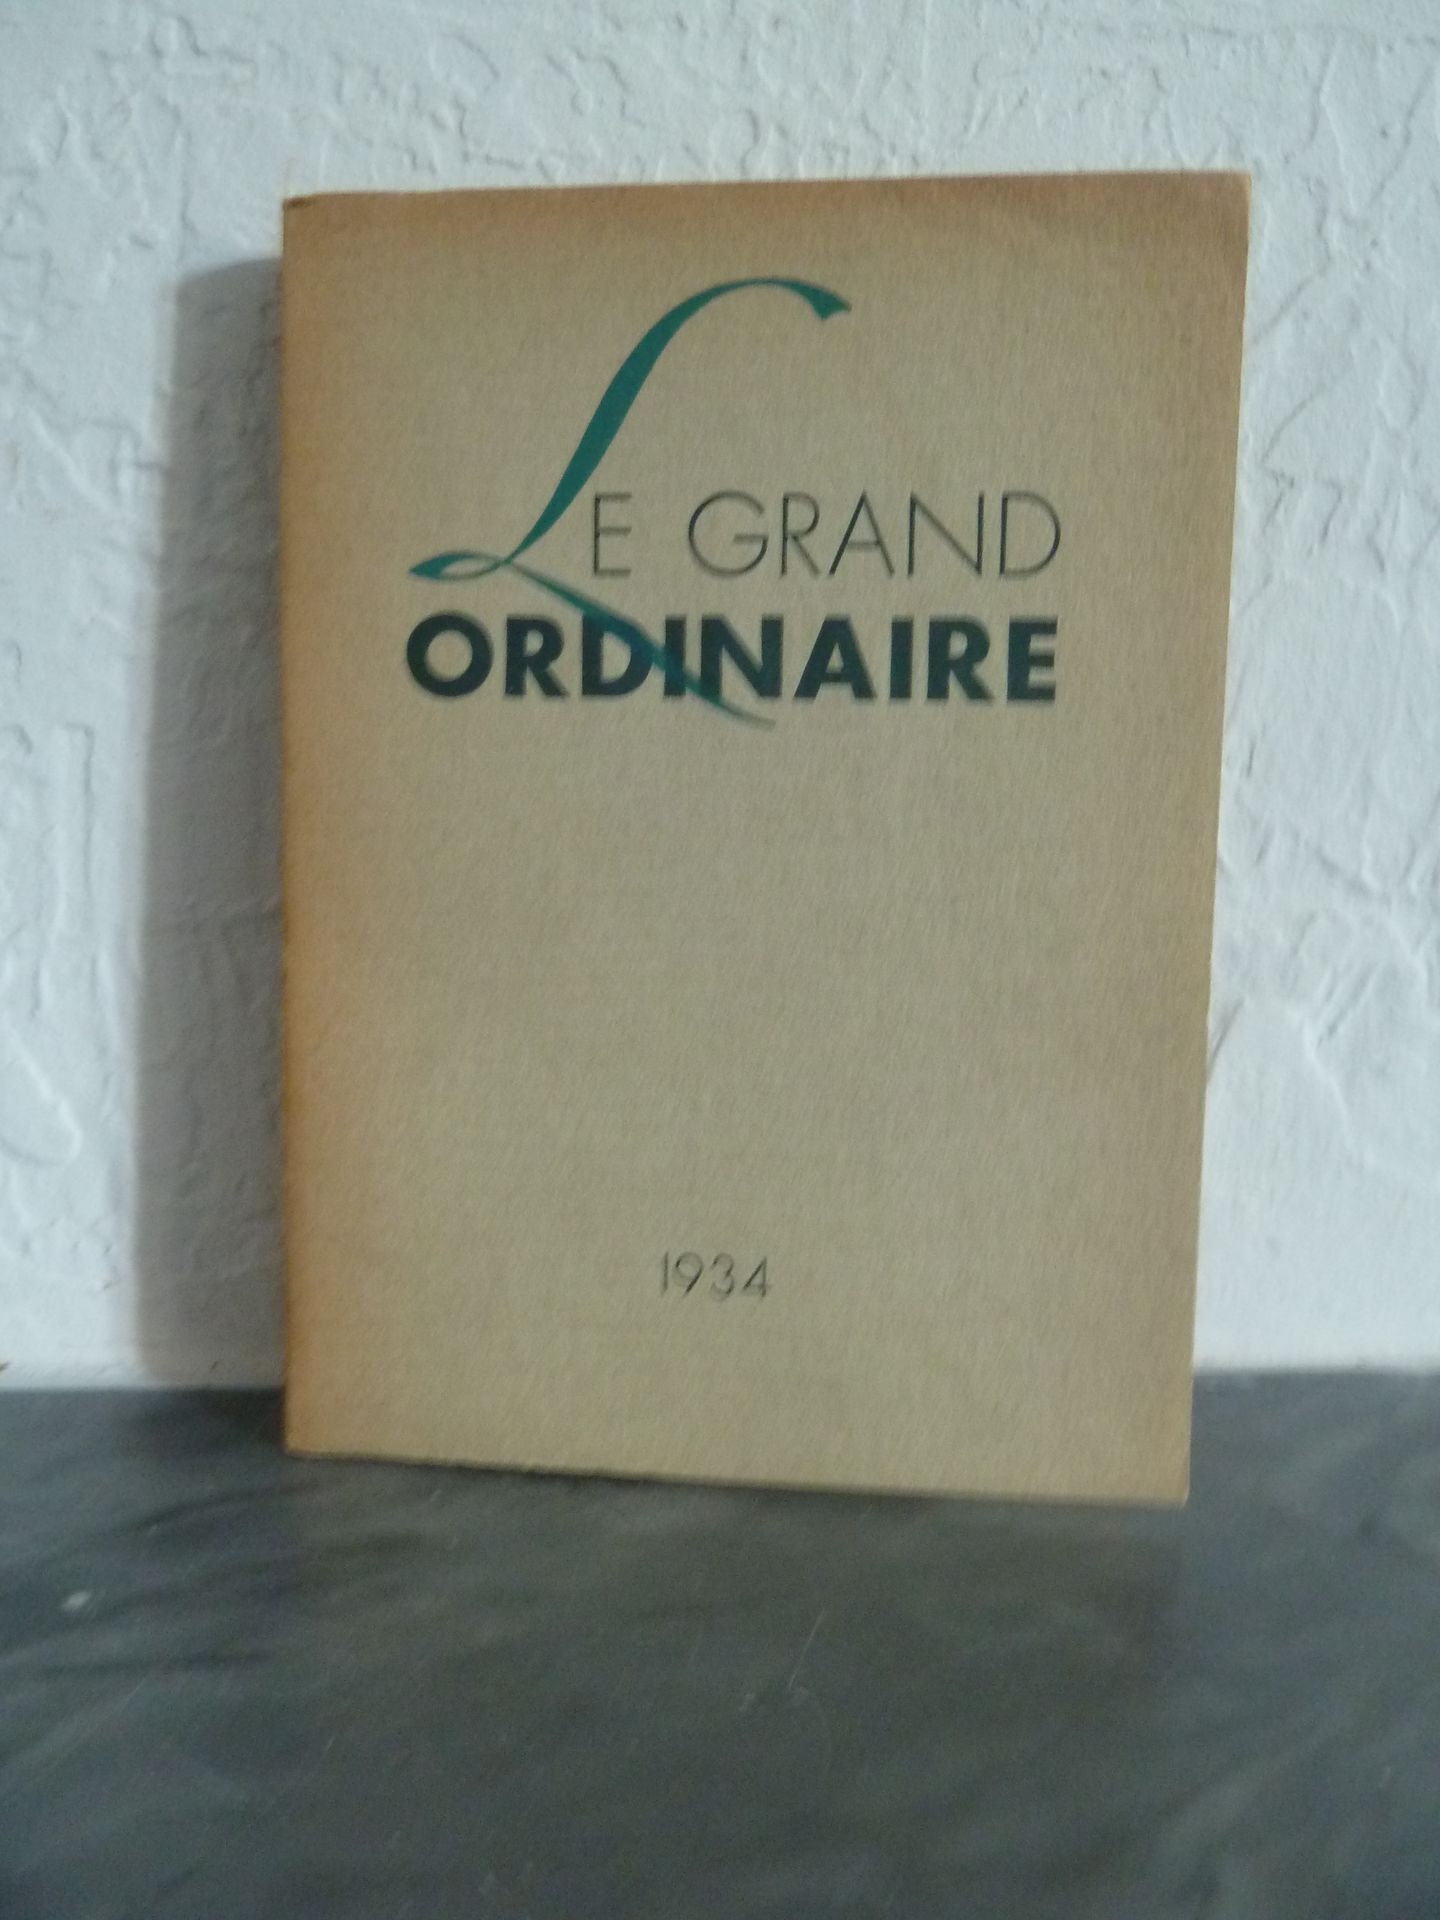 Null [THIRION, André (DOMINGUEZ, Oscar)]: Le grand ordinaire.S.L.N.E., 1934 (in &hellip;